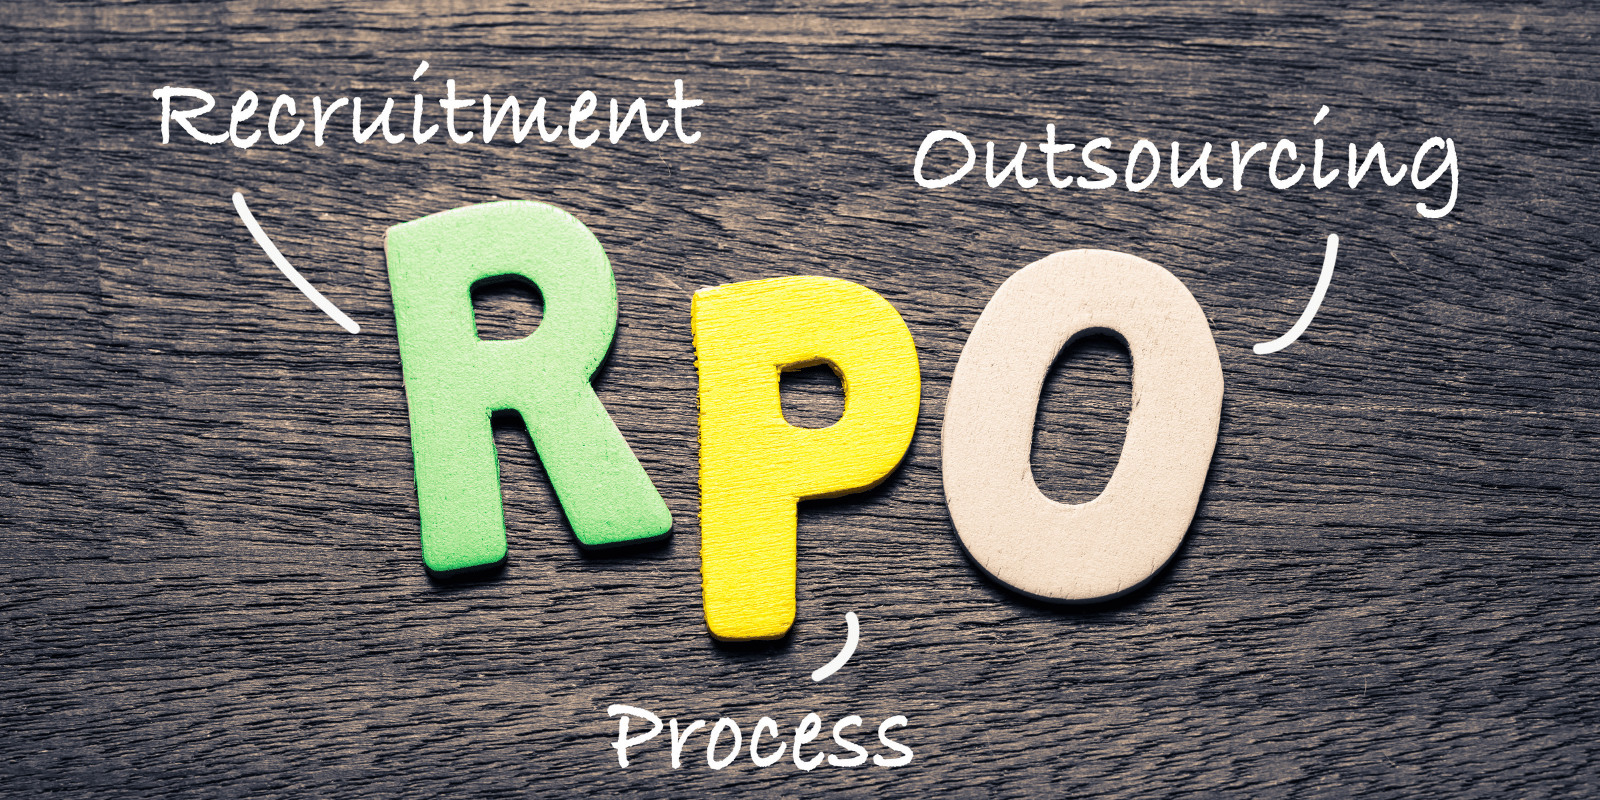 What is Recruitment Process Outsourcing (RPO), and how might it benefit your organisation?